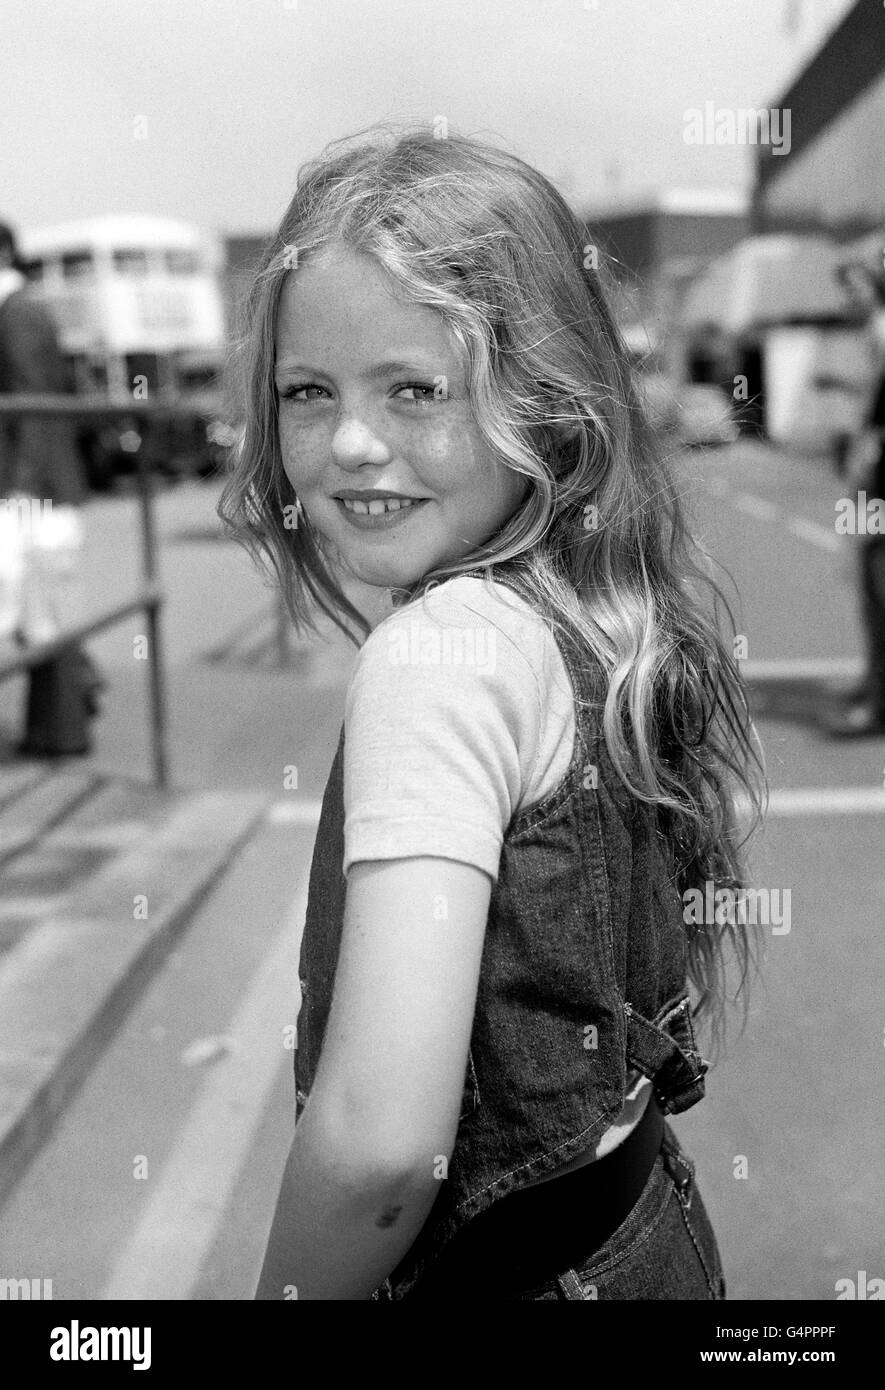 8 year-old Patsy Kensit before leaving Heathrow Airport in London for Moscow in Russia to attend the premiere of her new film 'The Blue Bird of Happiness' in which she plays alongside Elizabeth Taylor as her screen daughter, Mytyl in George Cukor's Soviet-American production. Stock Photo